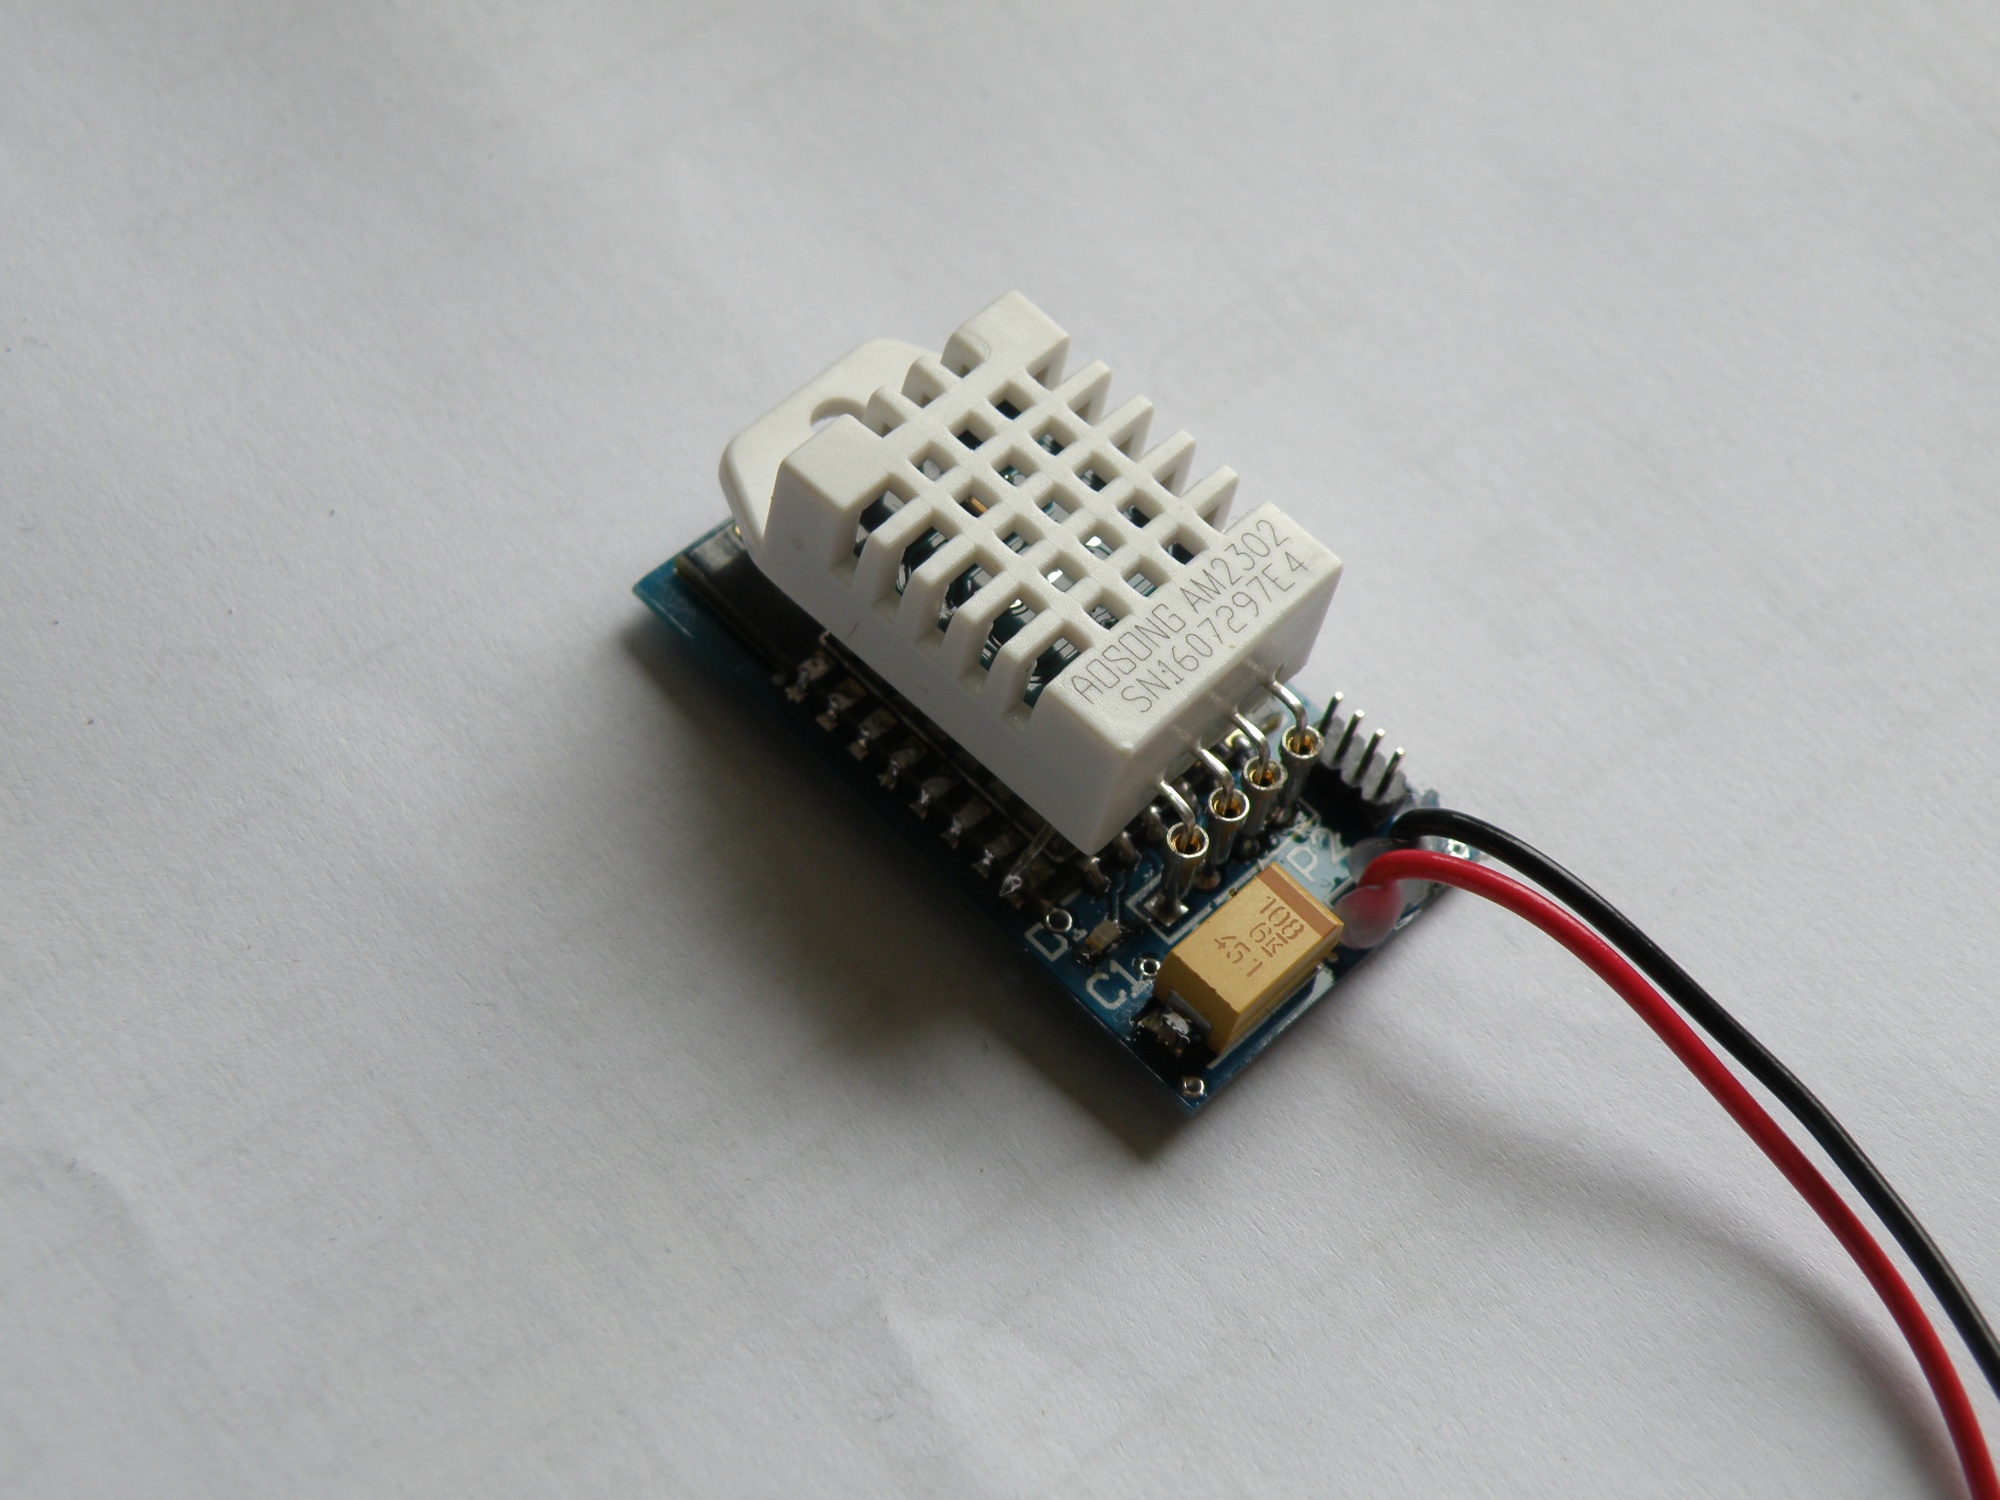 Finished module with sensor